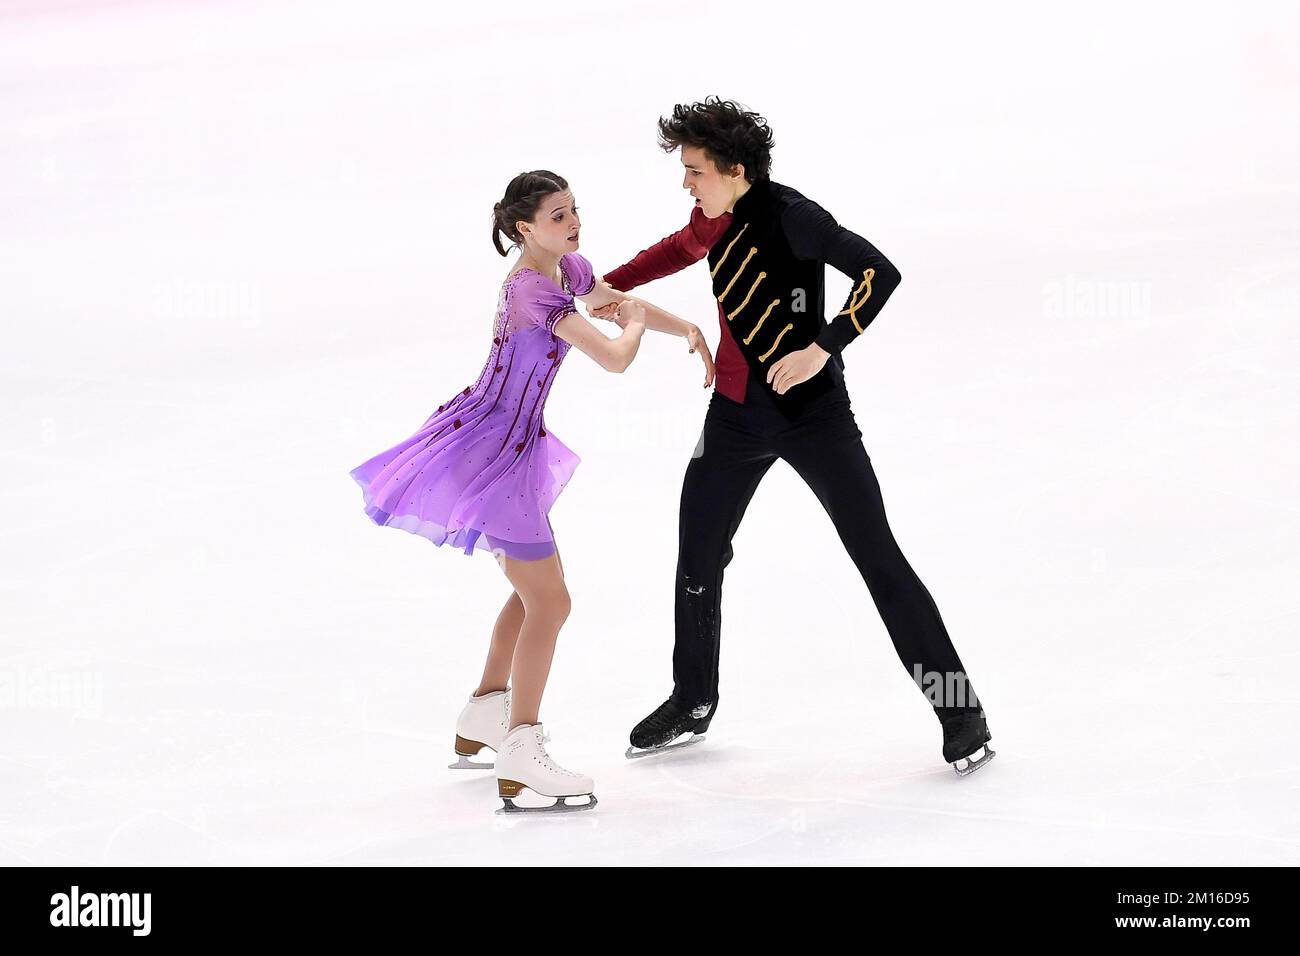 Turin, Italy. 10 December 2022. Darya Grimm, Michail Savitskiy of Germany compete in the Junior Ice Dance Free Dance during day three of the ISU Grand Prix of Figure Skating Final. Credit: Nicolò Campo/Alamy Live News Stock Photo